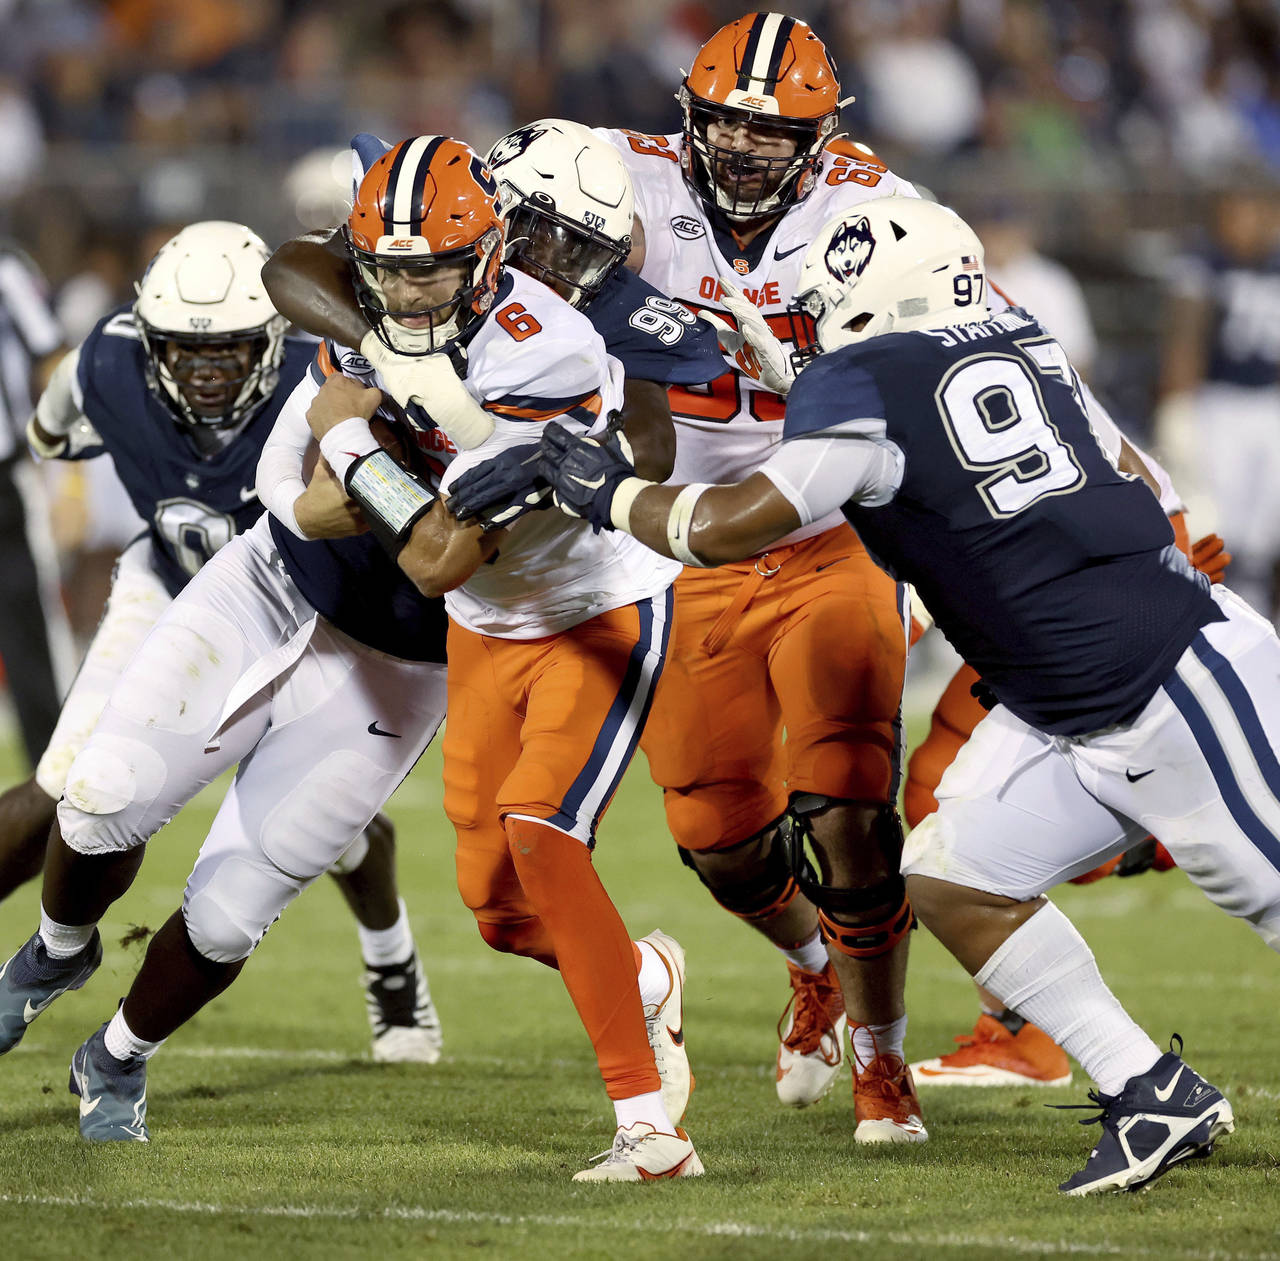 Syracuse quarterback Garrett Shrader (6) is tackled during an NCAA college football game against Co...